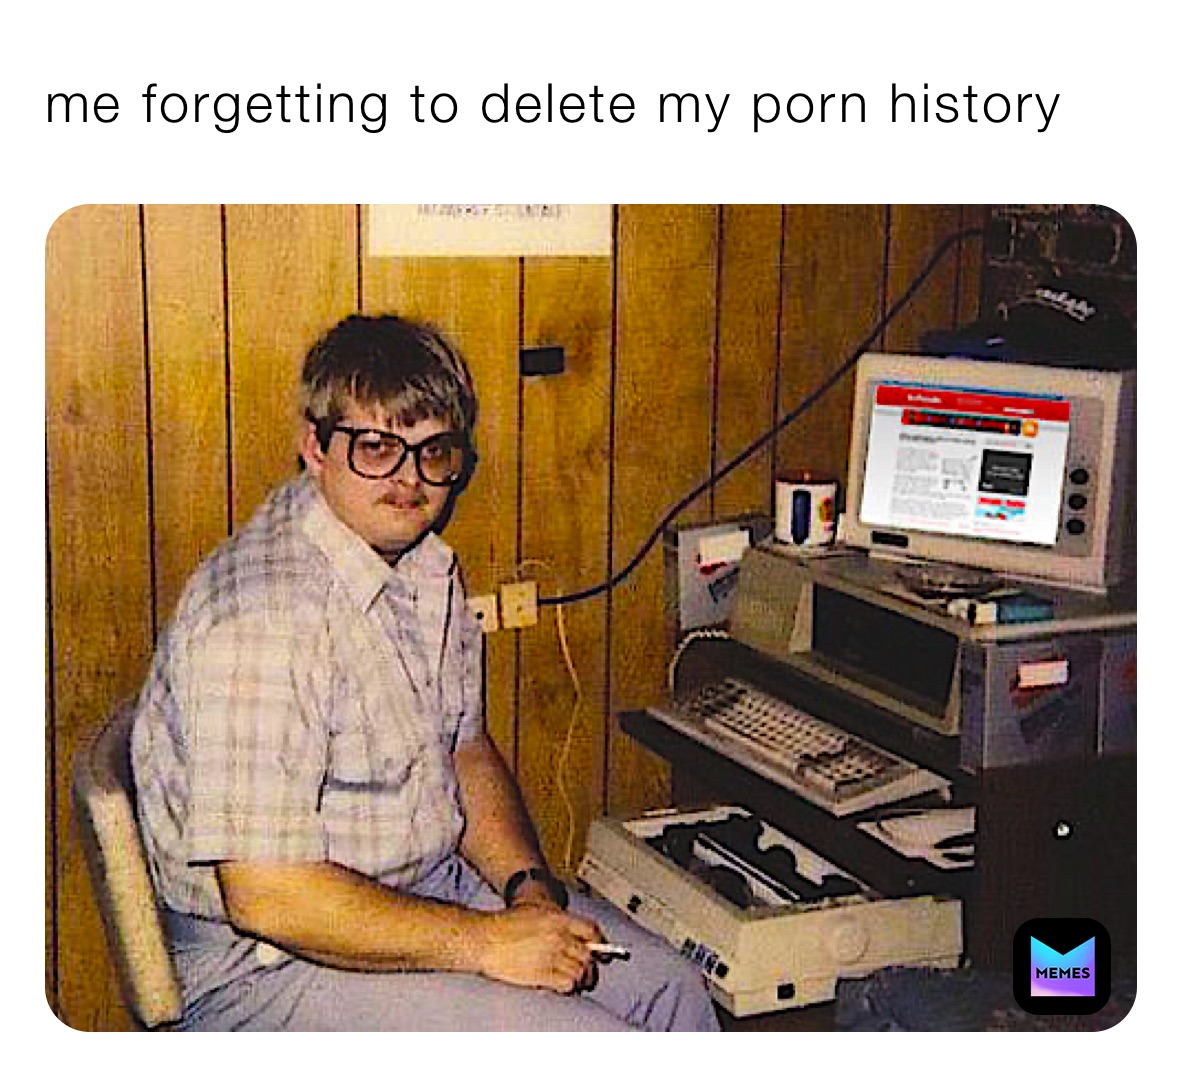 My Porn Meme - me forgetting to delete my porn history | @you_looked | Memes